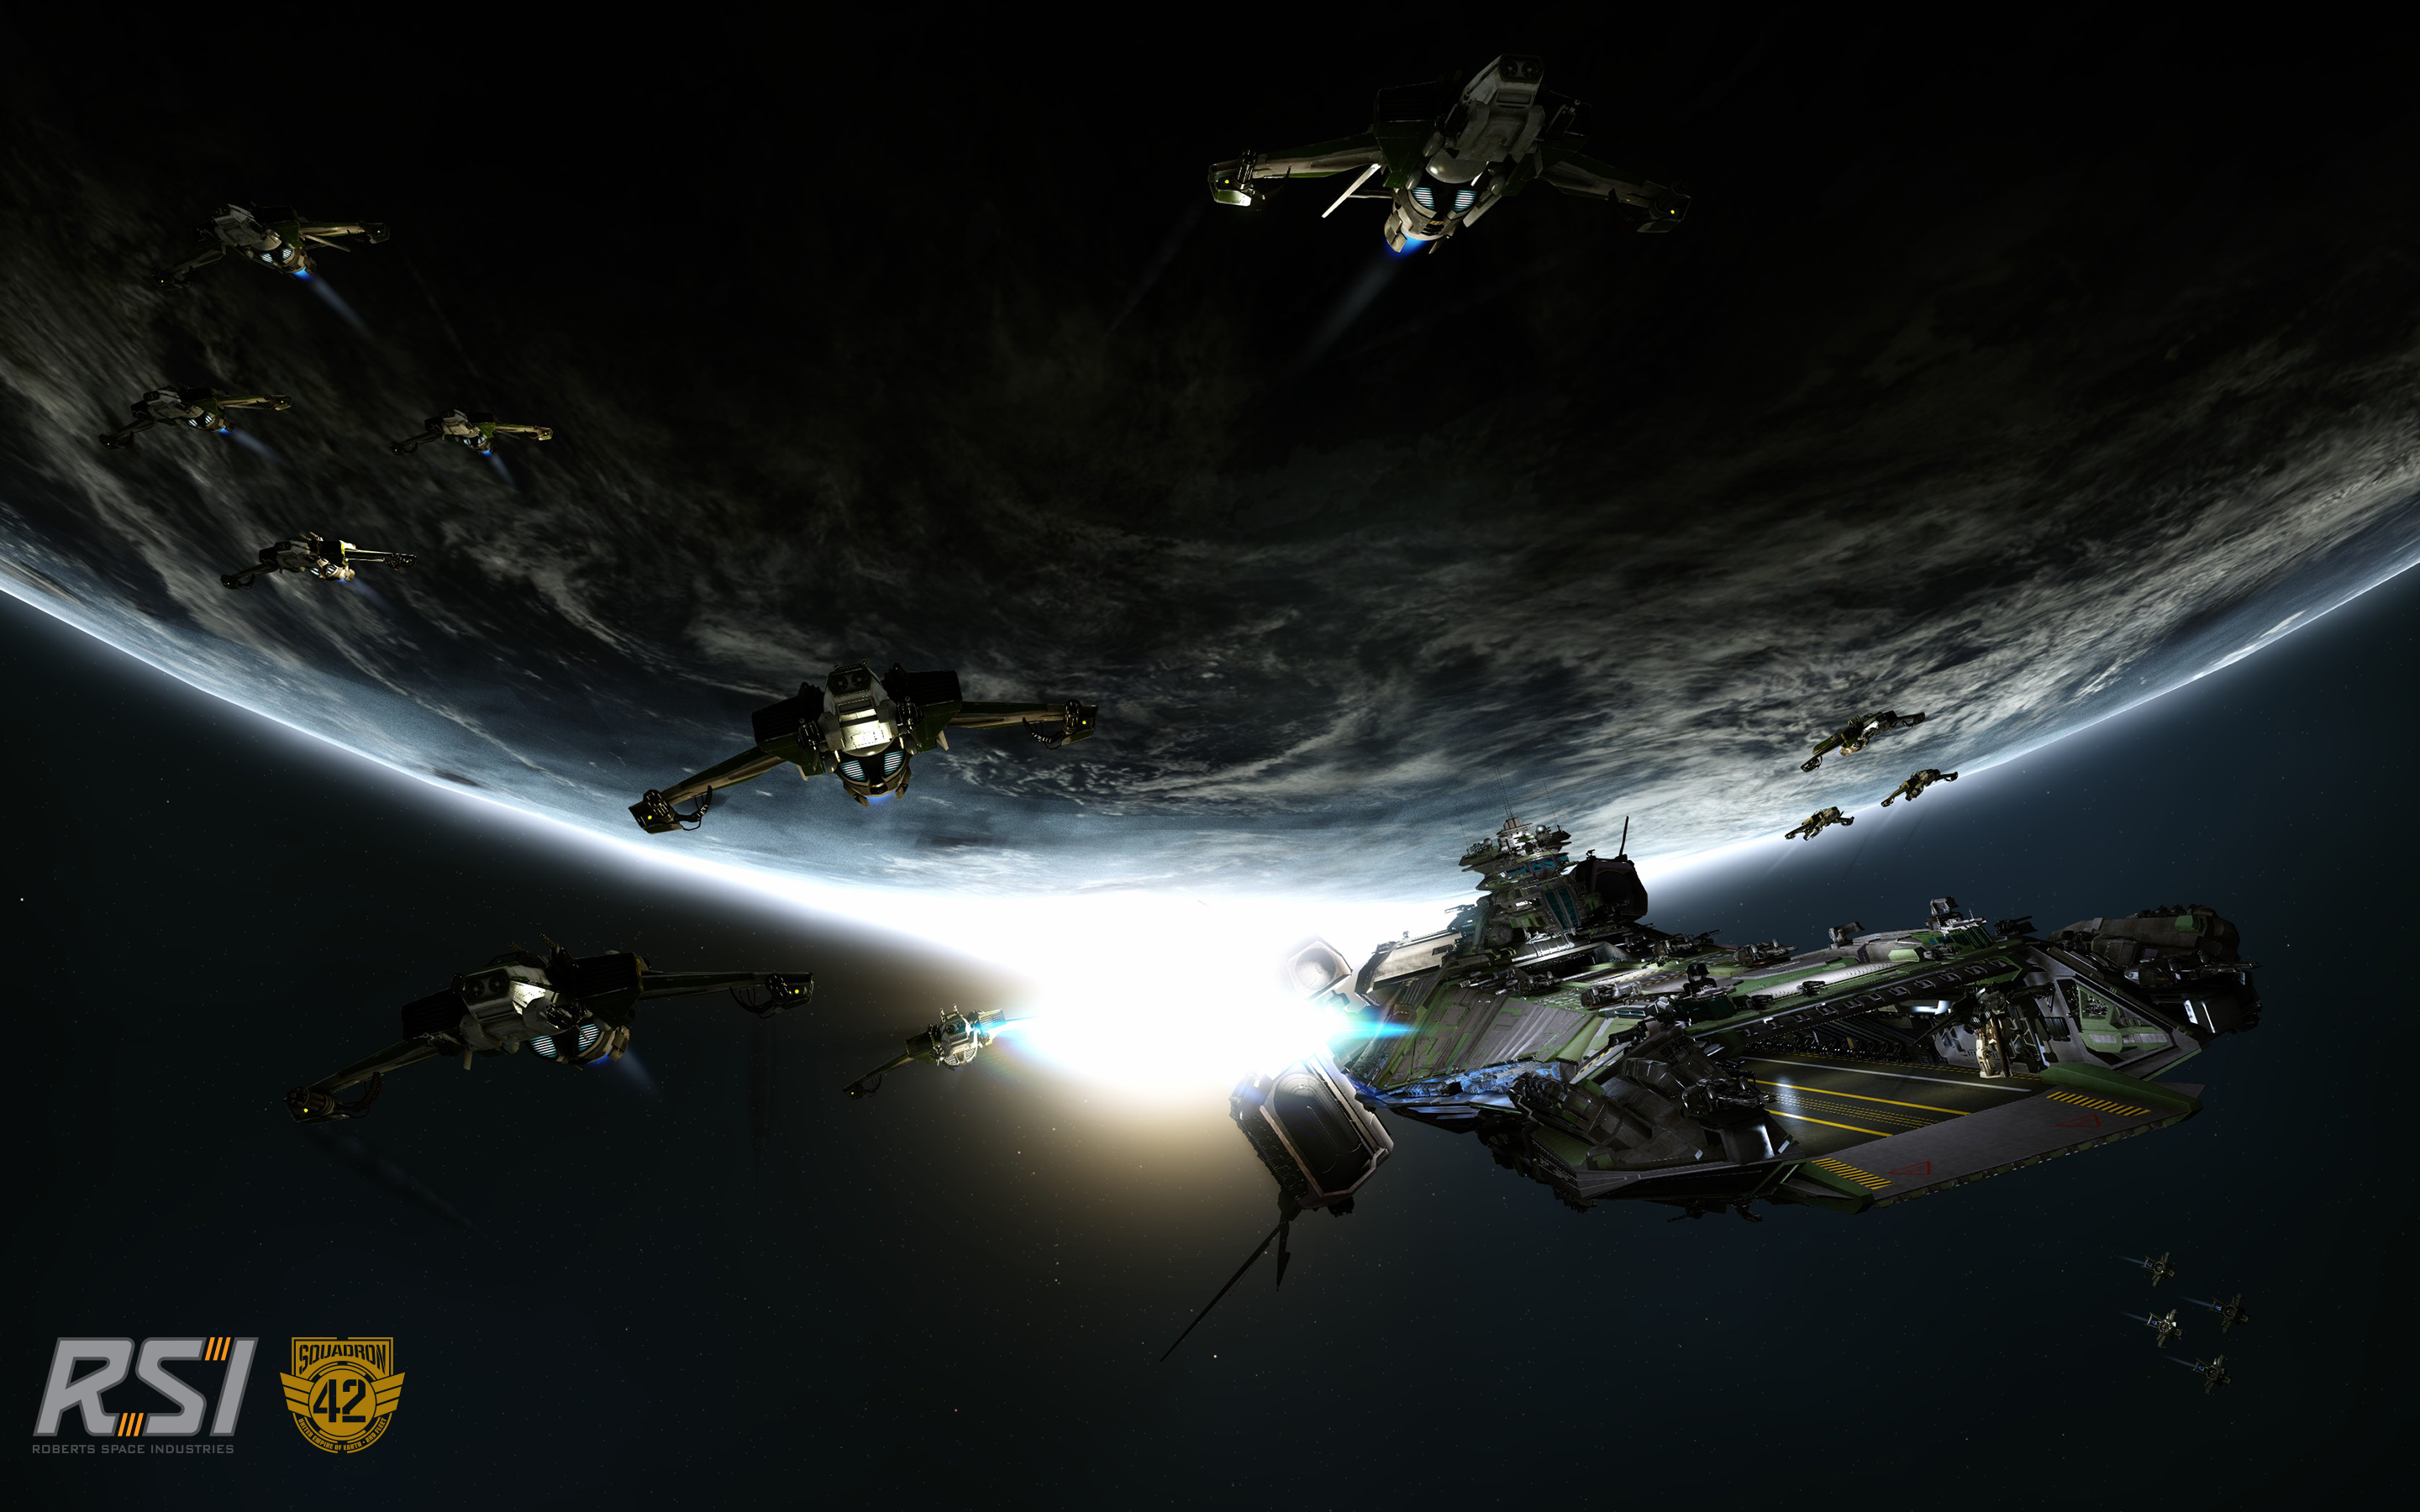 General 2880x1800 Star Citizen space spaceship video games PC gaming science fiction video game art